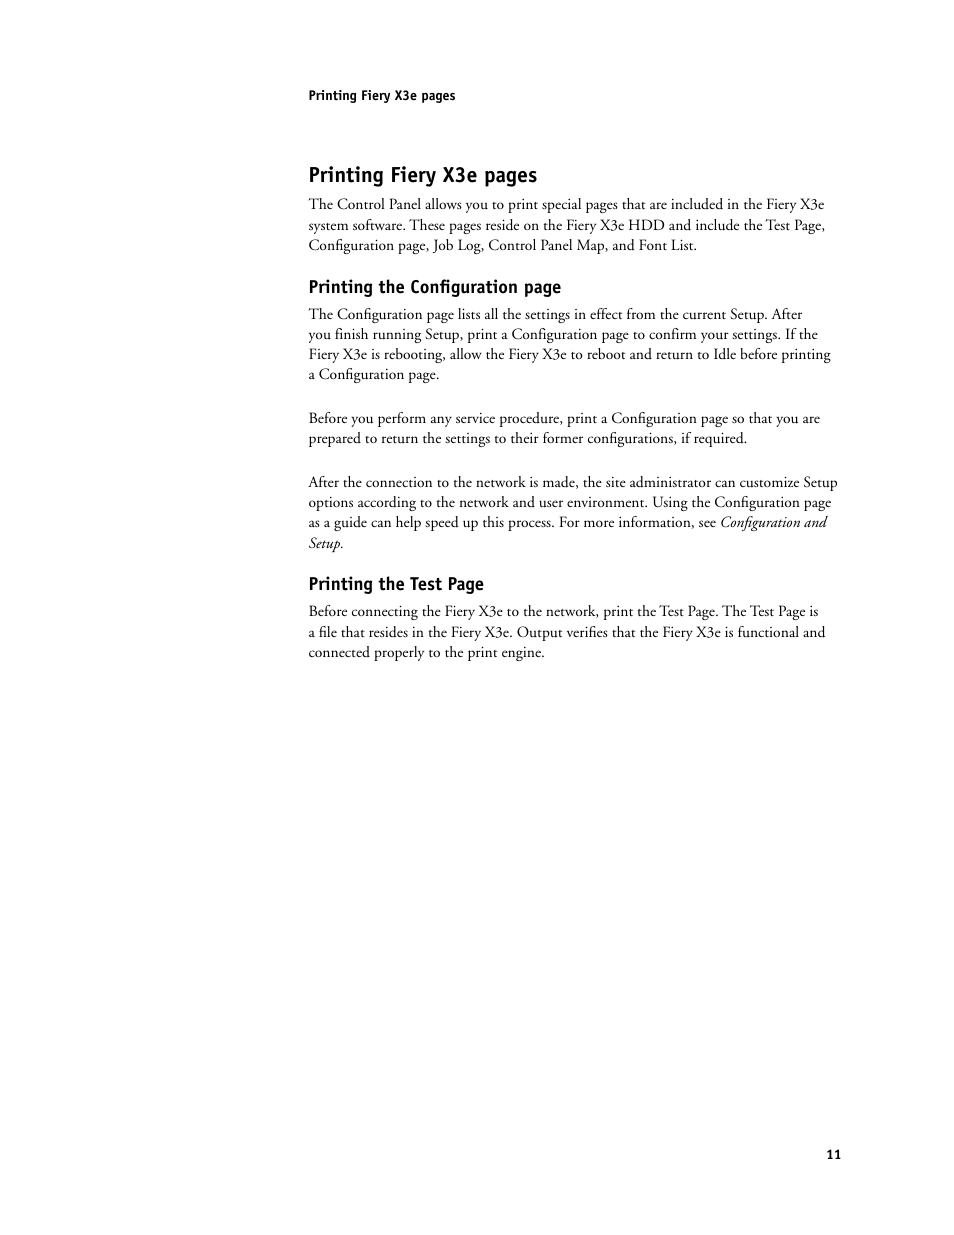 Printing fiery x3e pages | Konica Minolta IC-402 User Manual | Page 11 / 14